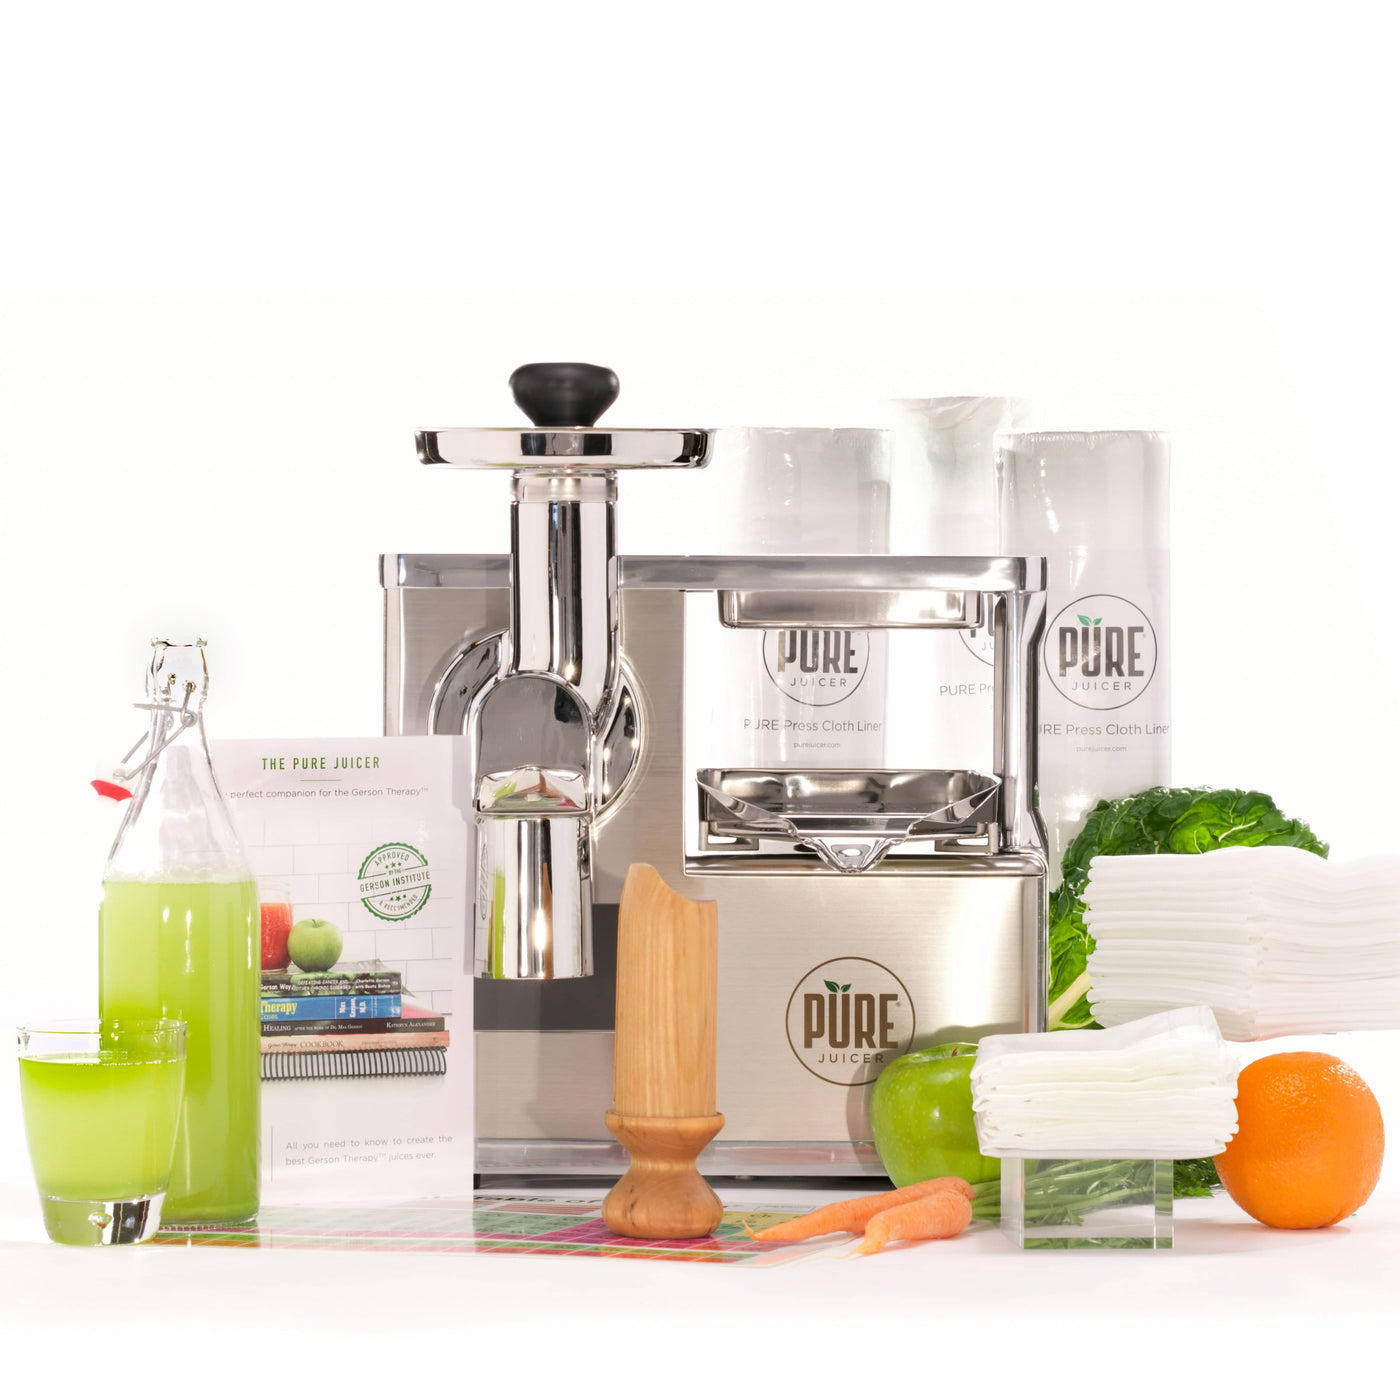 PURE Juicer Review: The Ultimate Hydraulic Juice Press